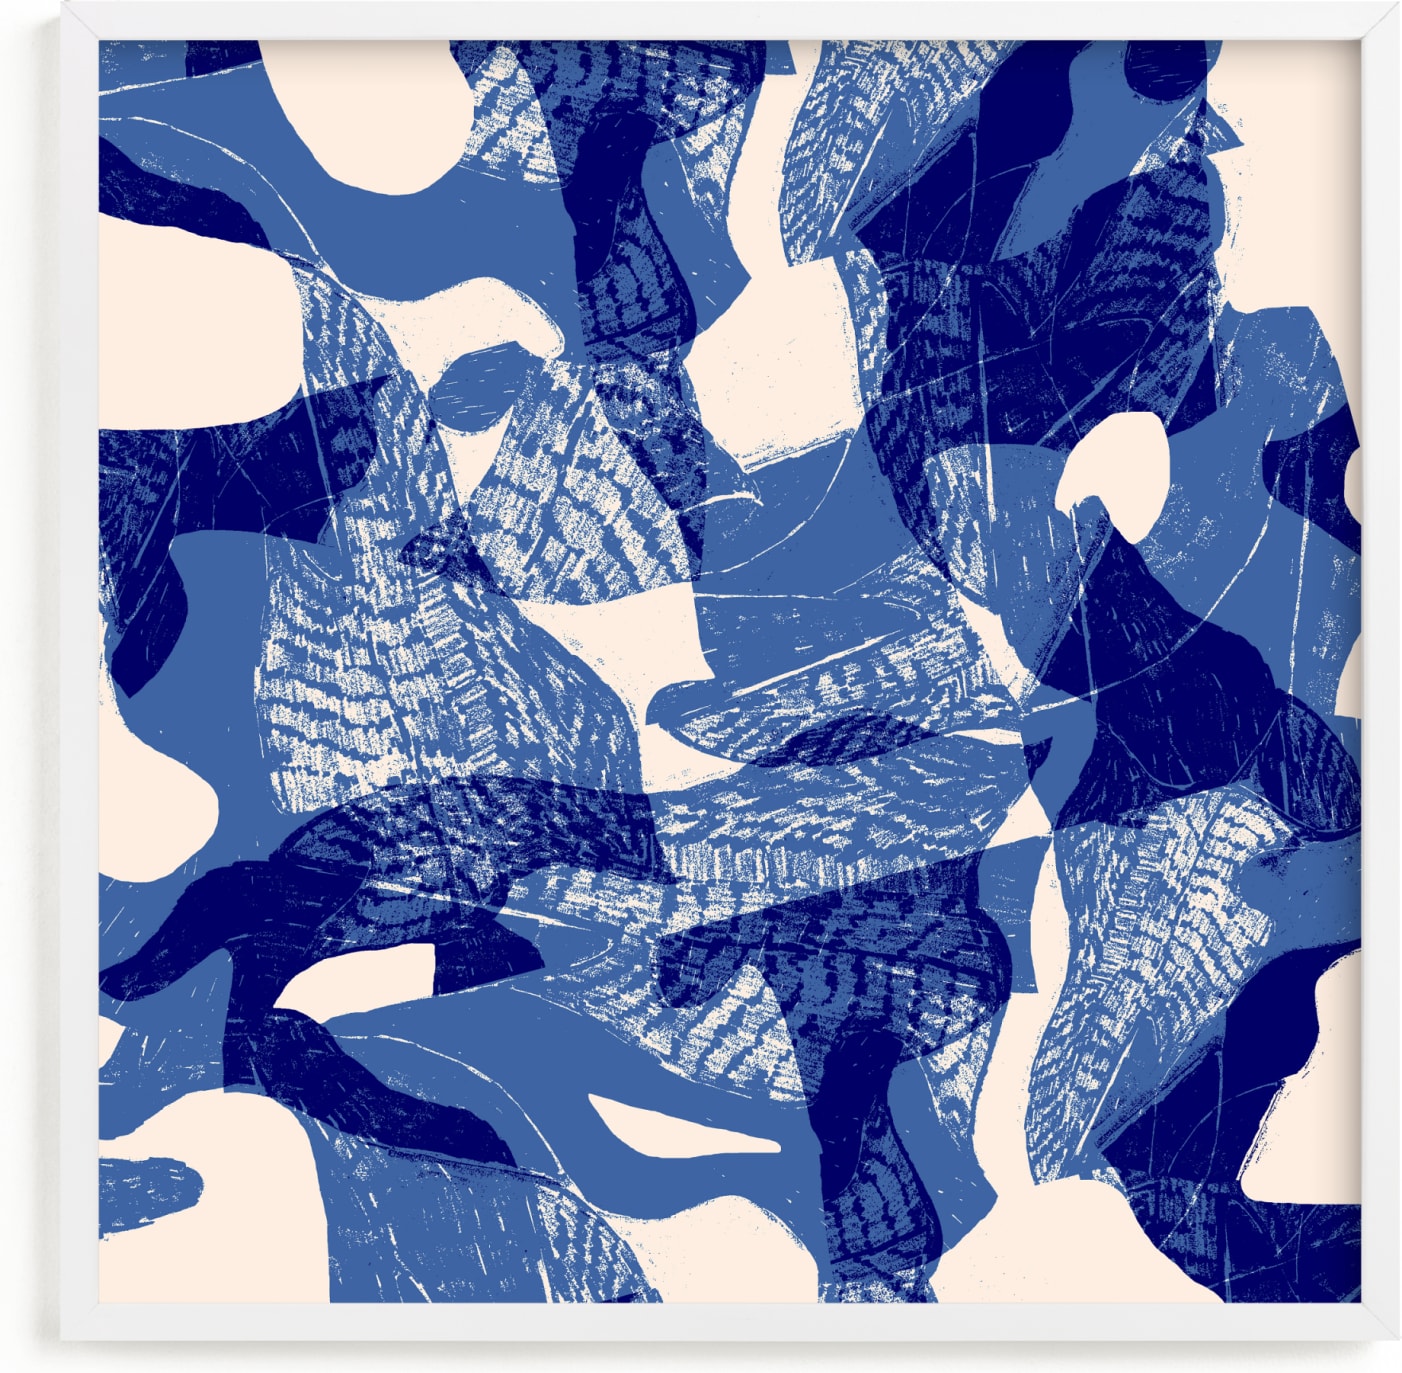 This is a blue art by Oana Prints called Bird flight.